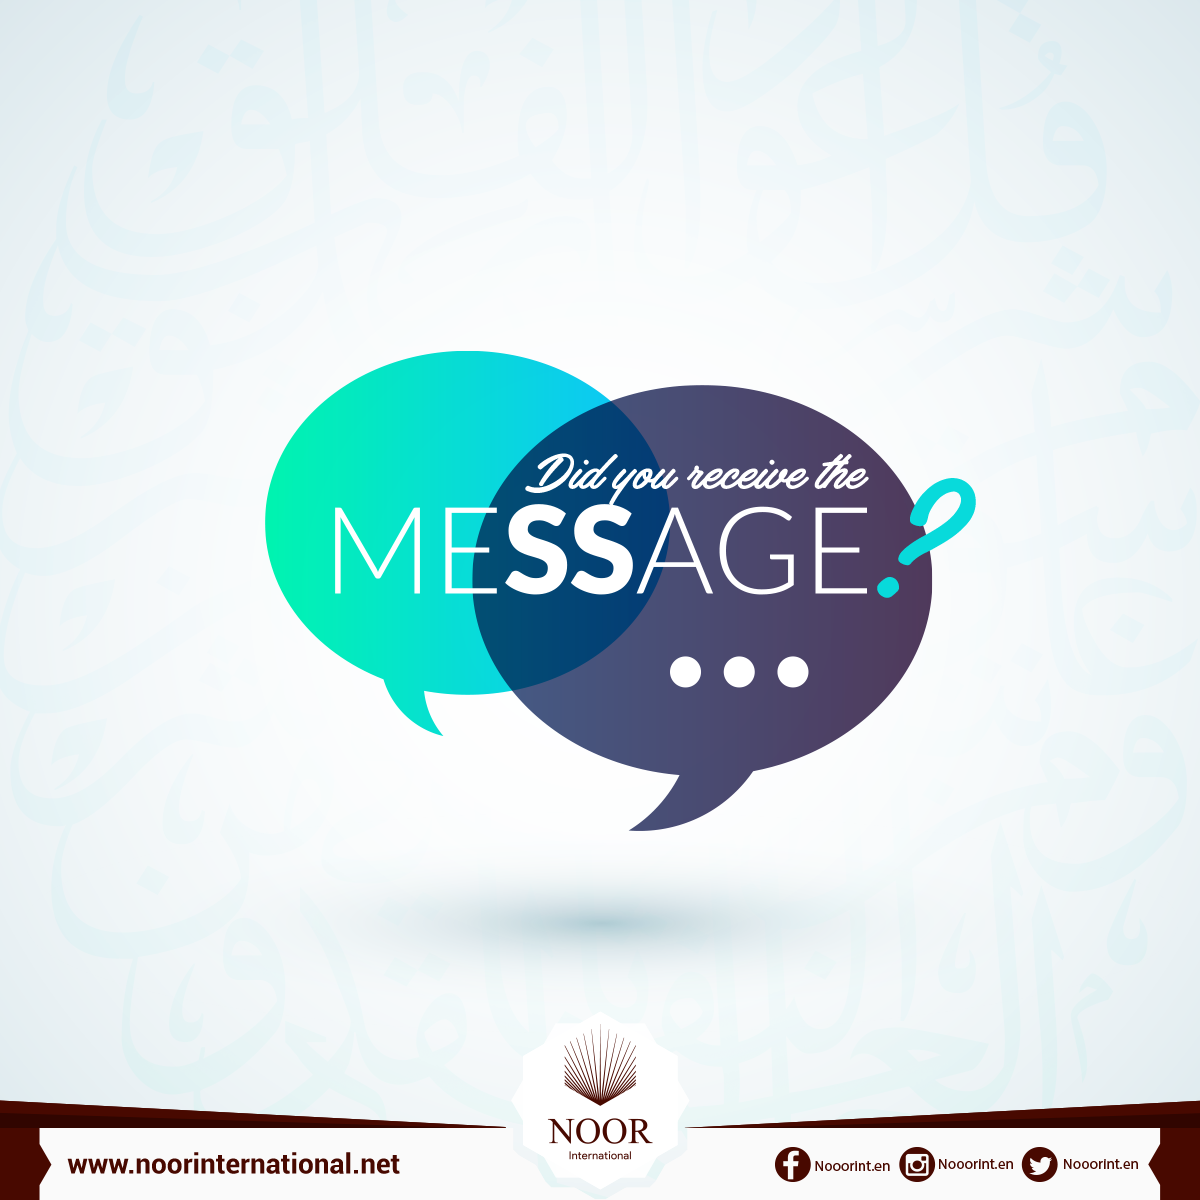 Did you receive the message?